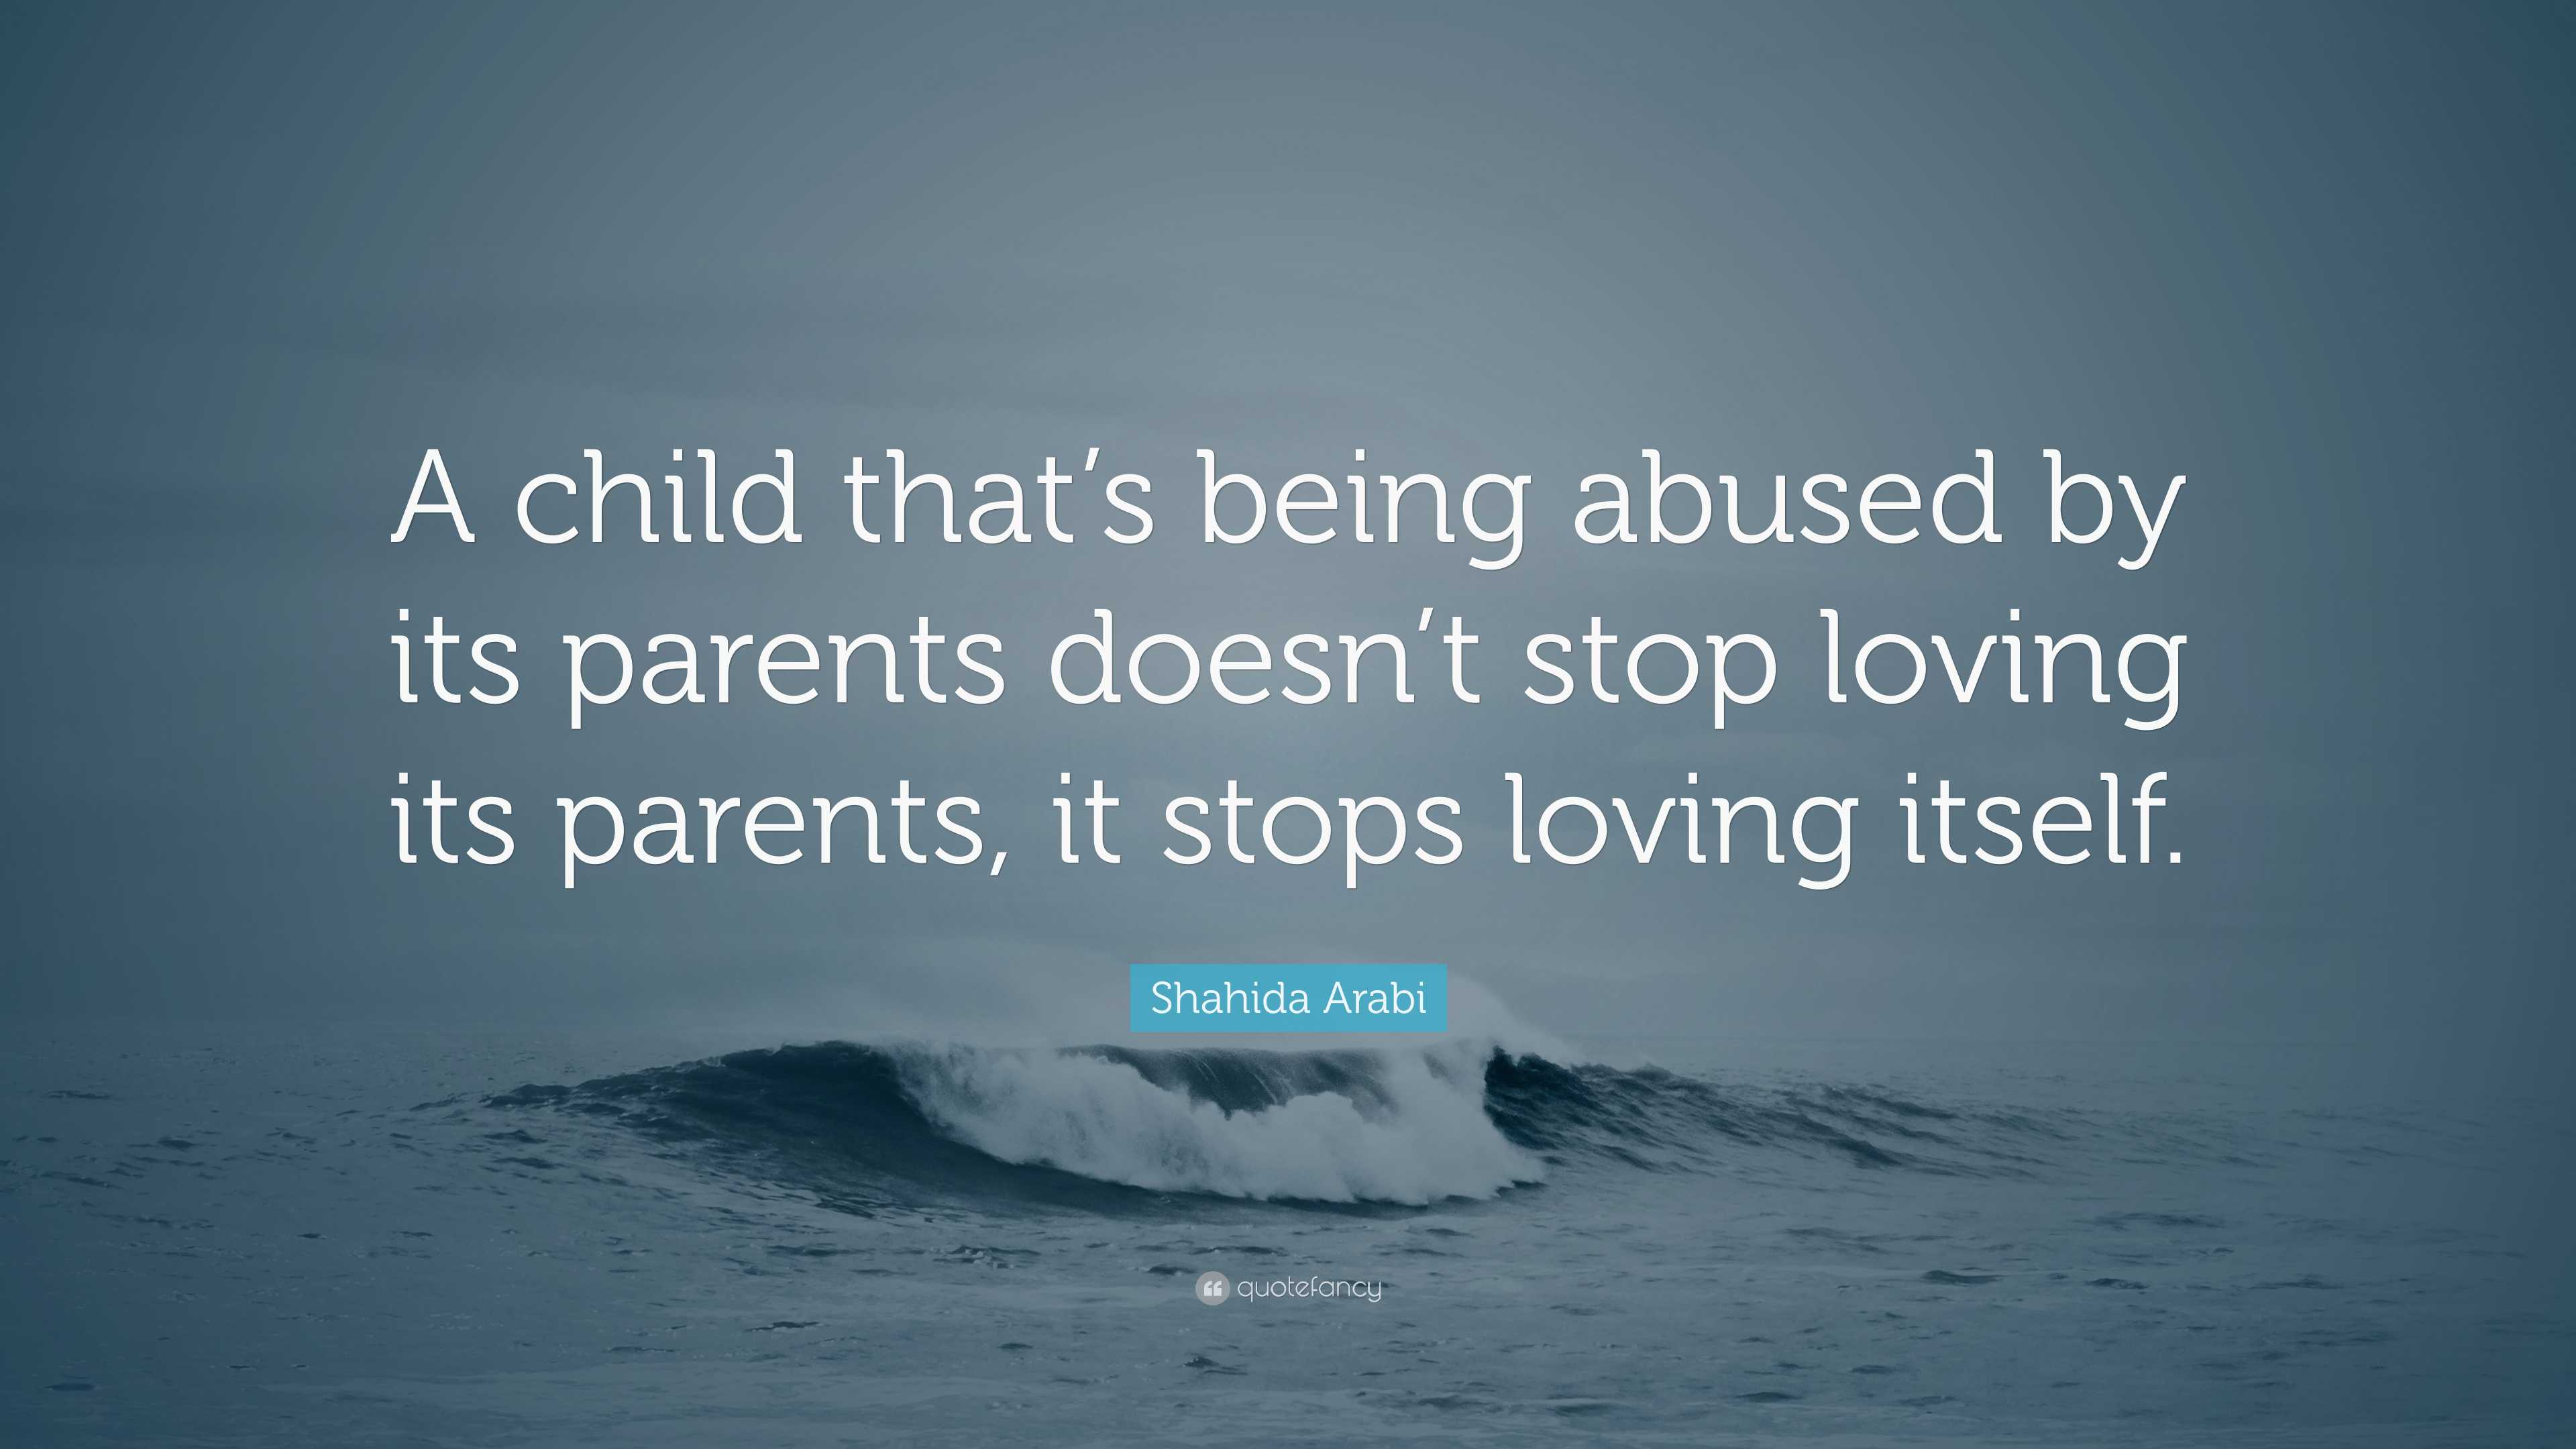 Shahida Arabi Quote: “A child that’s being abused by its parents doesn ...